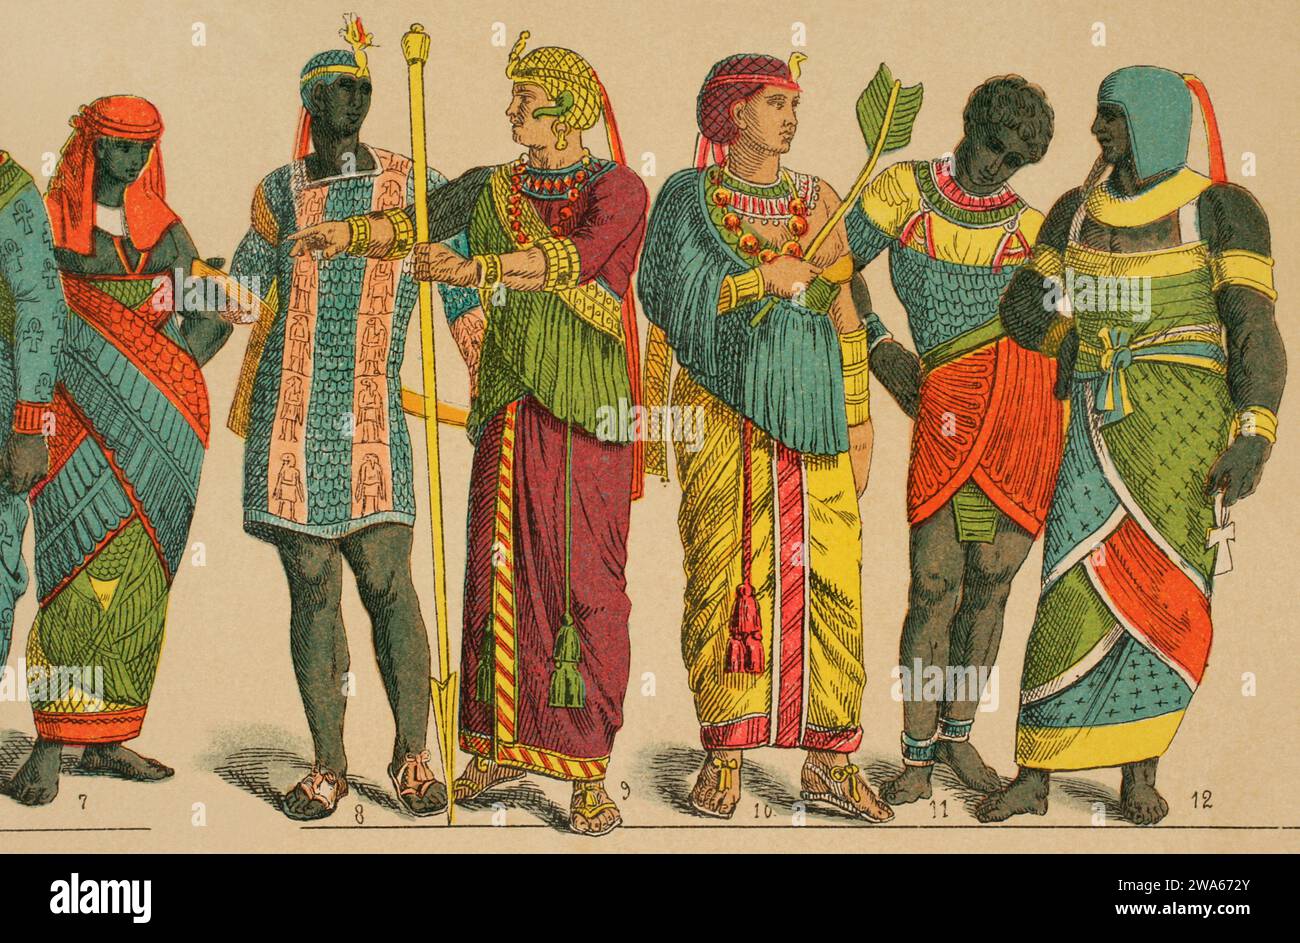 Ancient Egypt. From left to right; 7: priestess in ceremonial costume, 8: breastplate or chain-mail of scales, 9-10: costume adhered to the body with Stock Photo